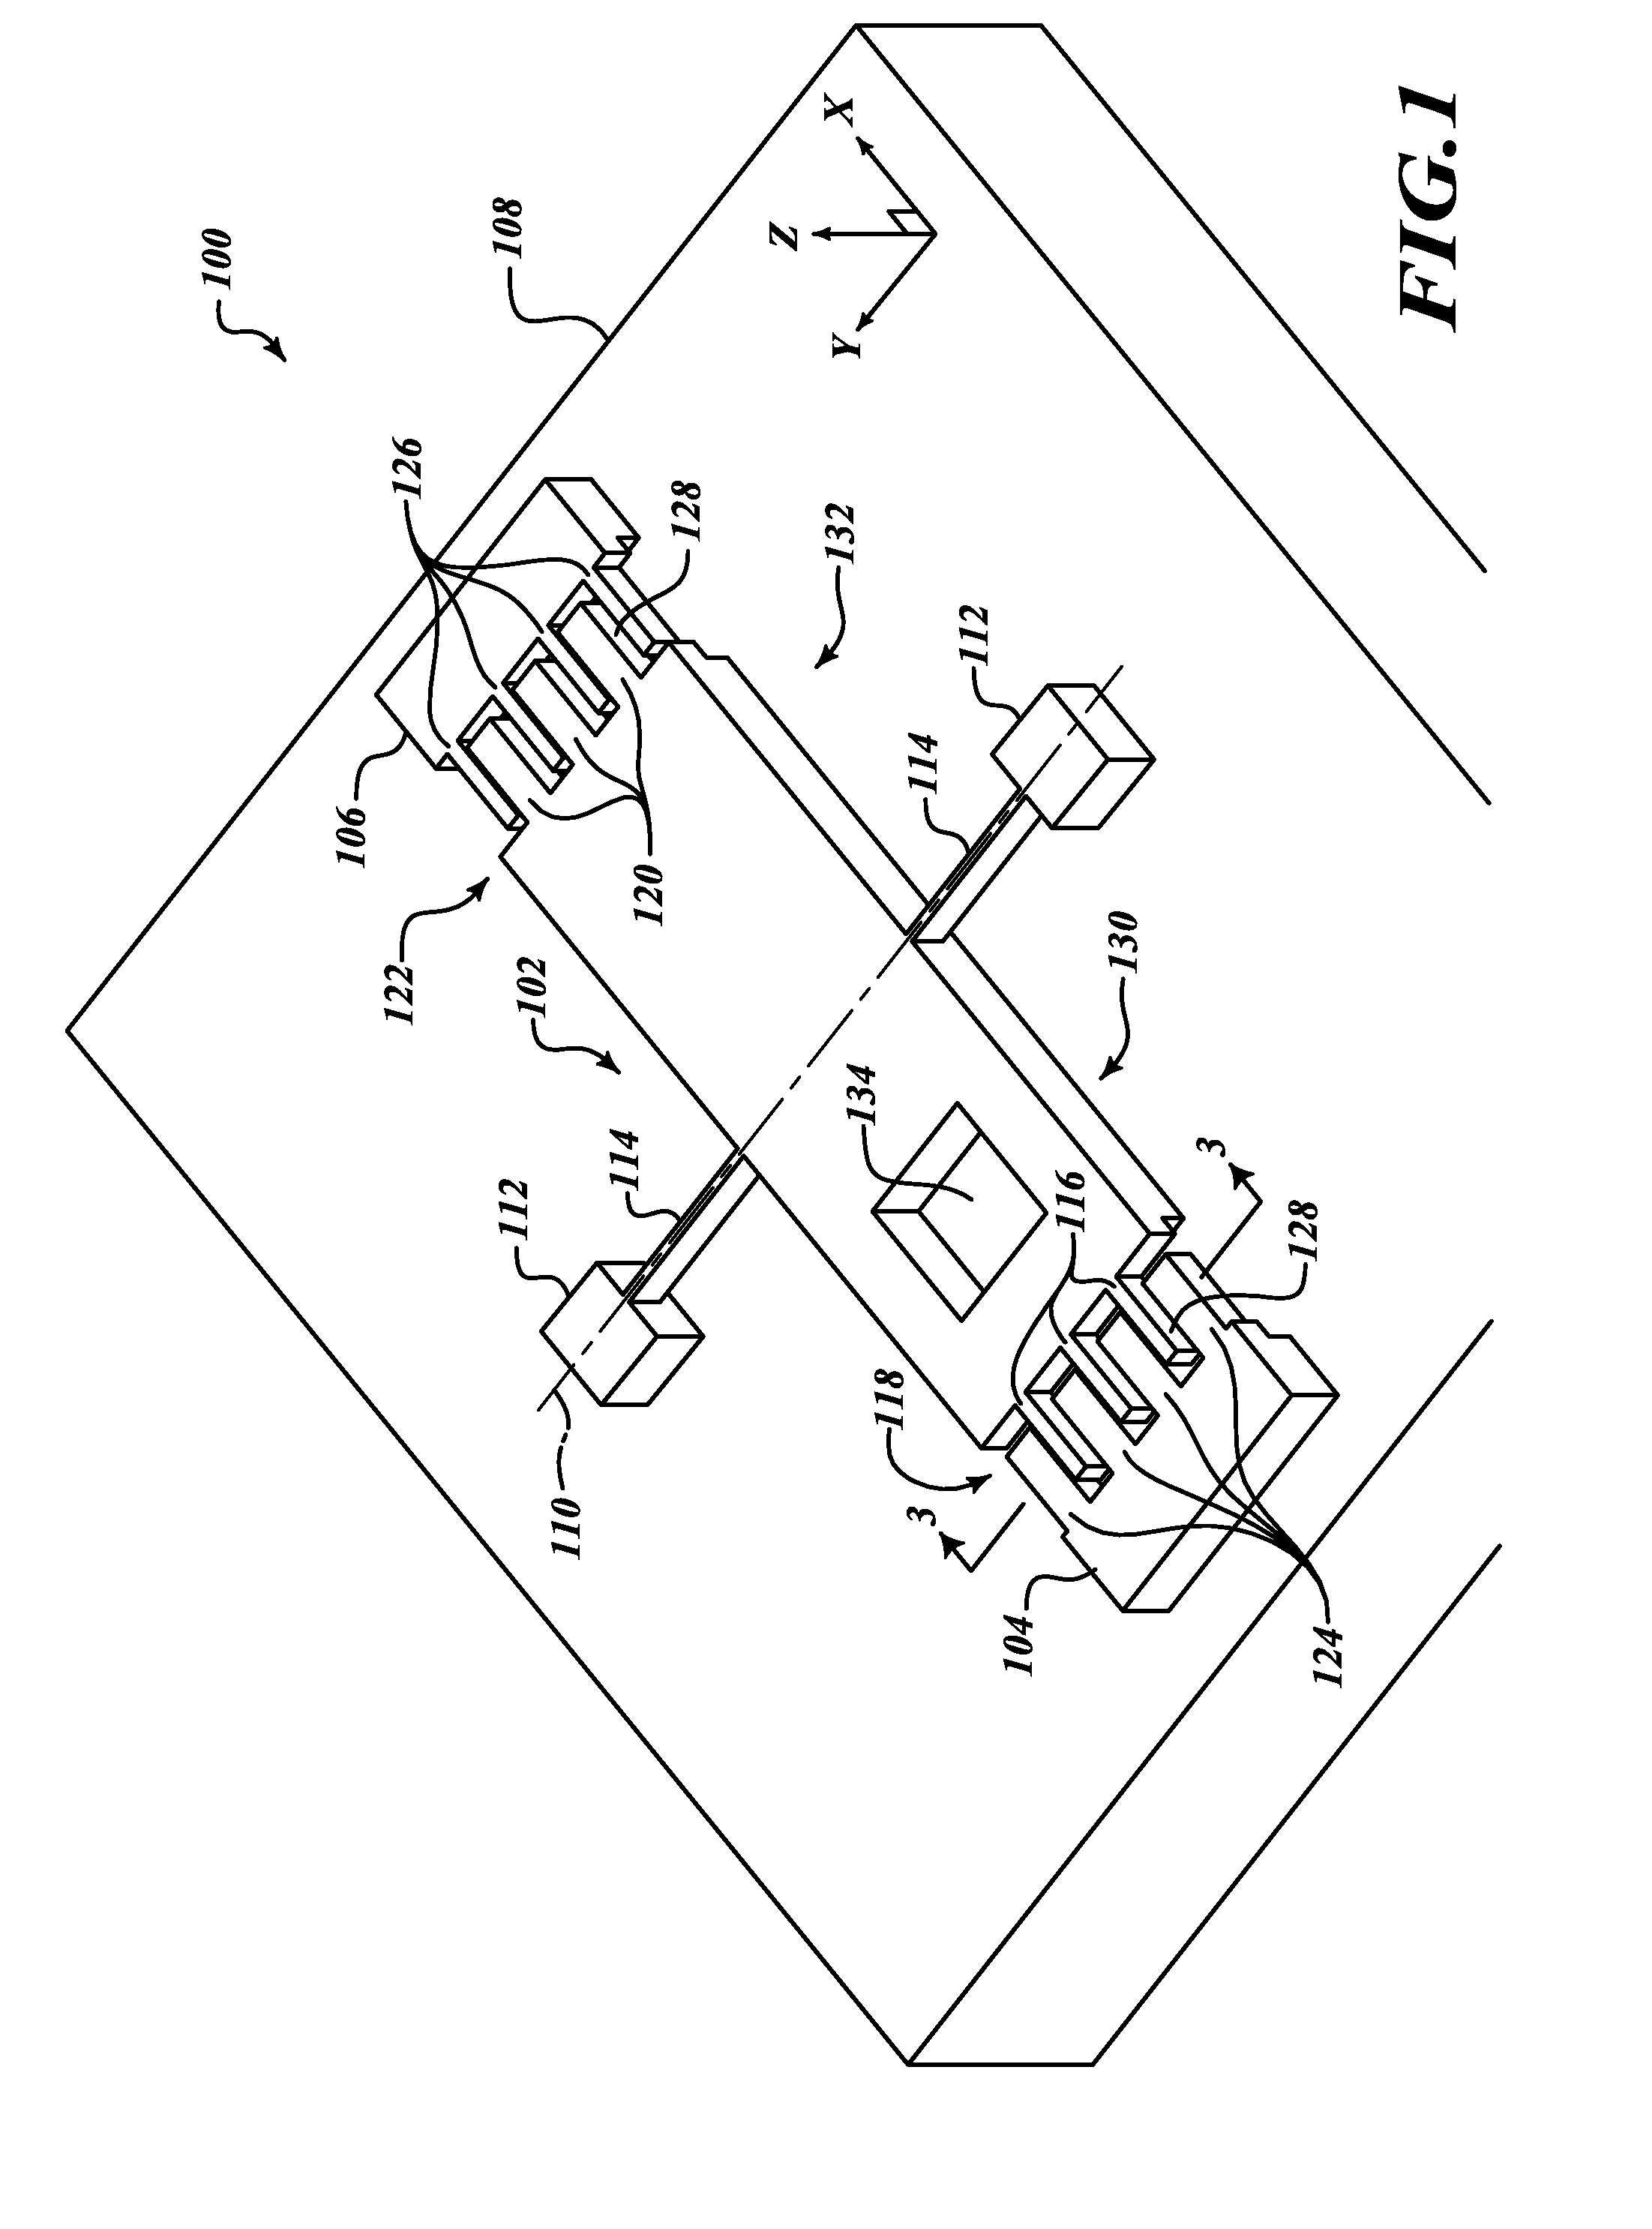 Systems and methods for detecting out-of-plane linear acceleration with a closed loop linear drive accelerometer